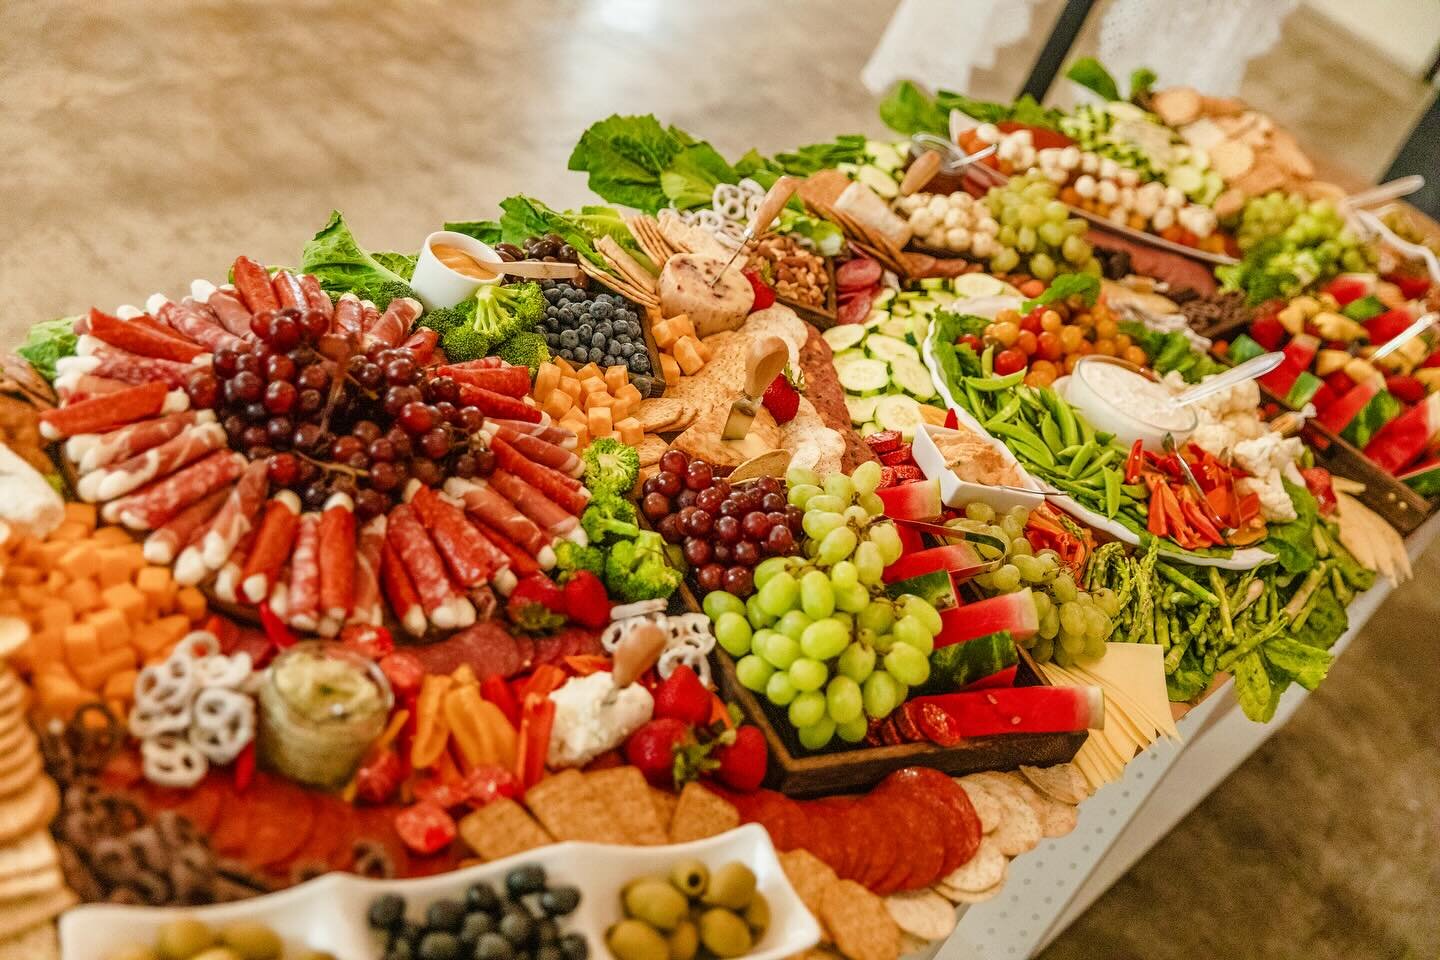 Feast your eyes on this captivating graze table spread! 😍 Trust me, just one glance at this photo and your stomach will start growling. 🤤 Now, I&rsquo;m curious... what&rsquo;s your ultimate go-to or must-have when it comes to grazing tables? Share